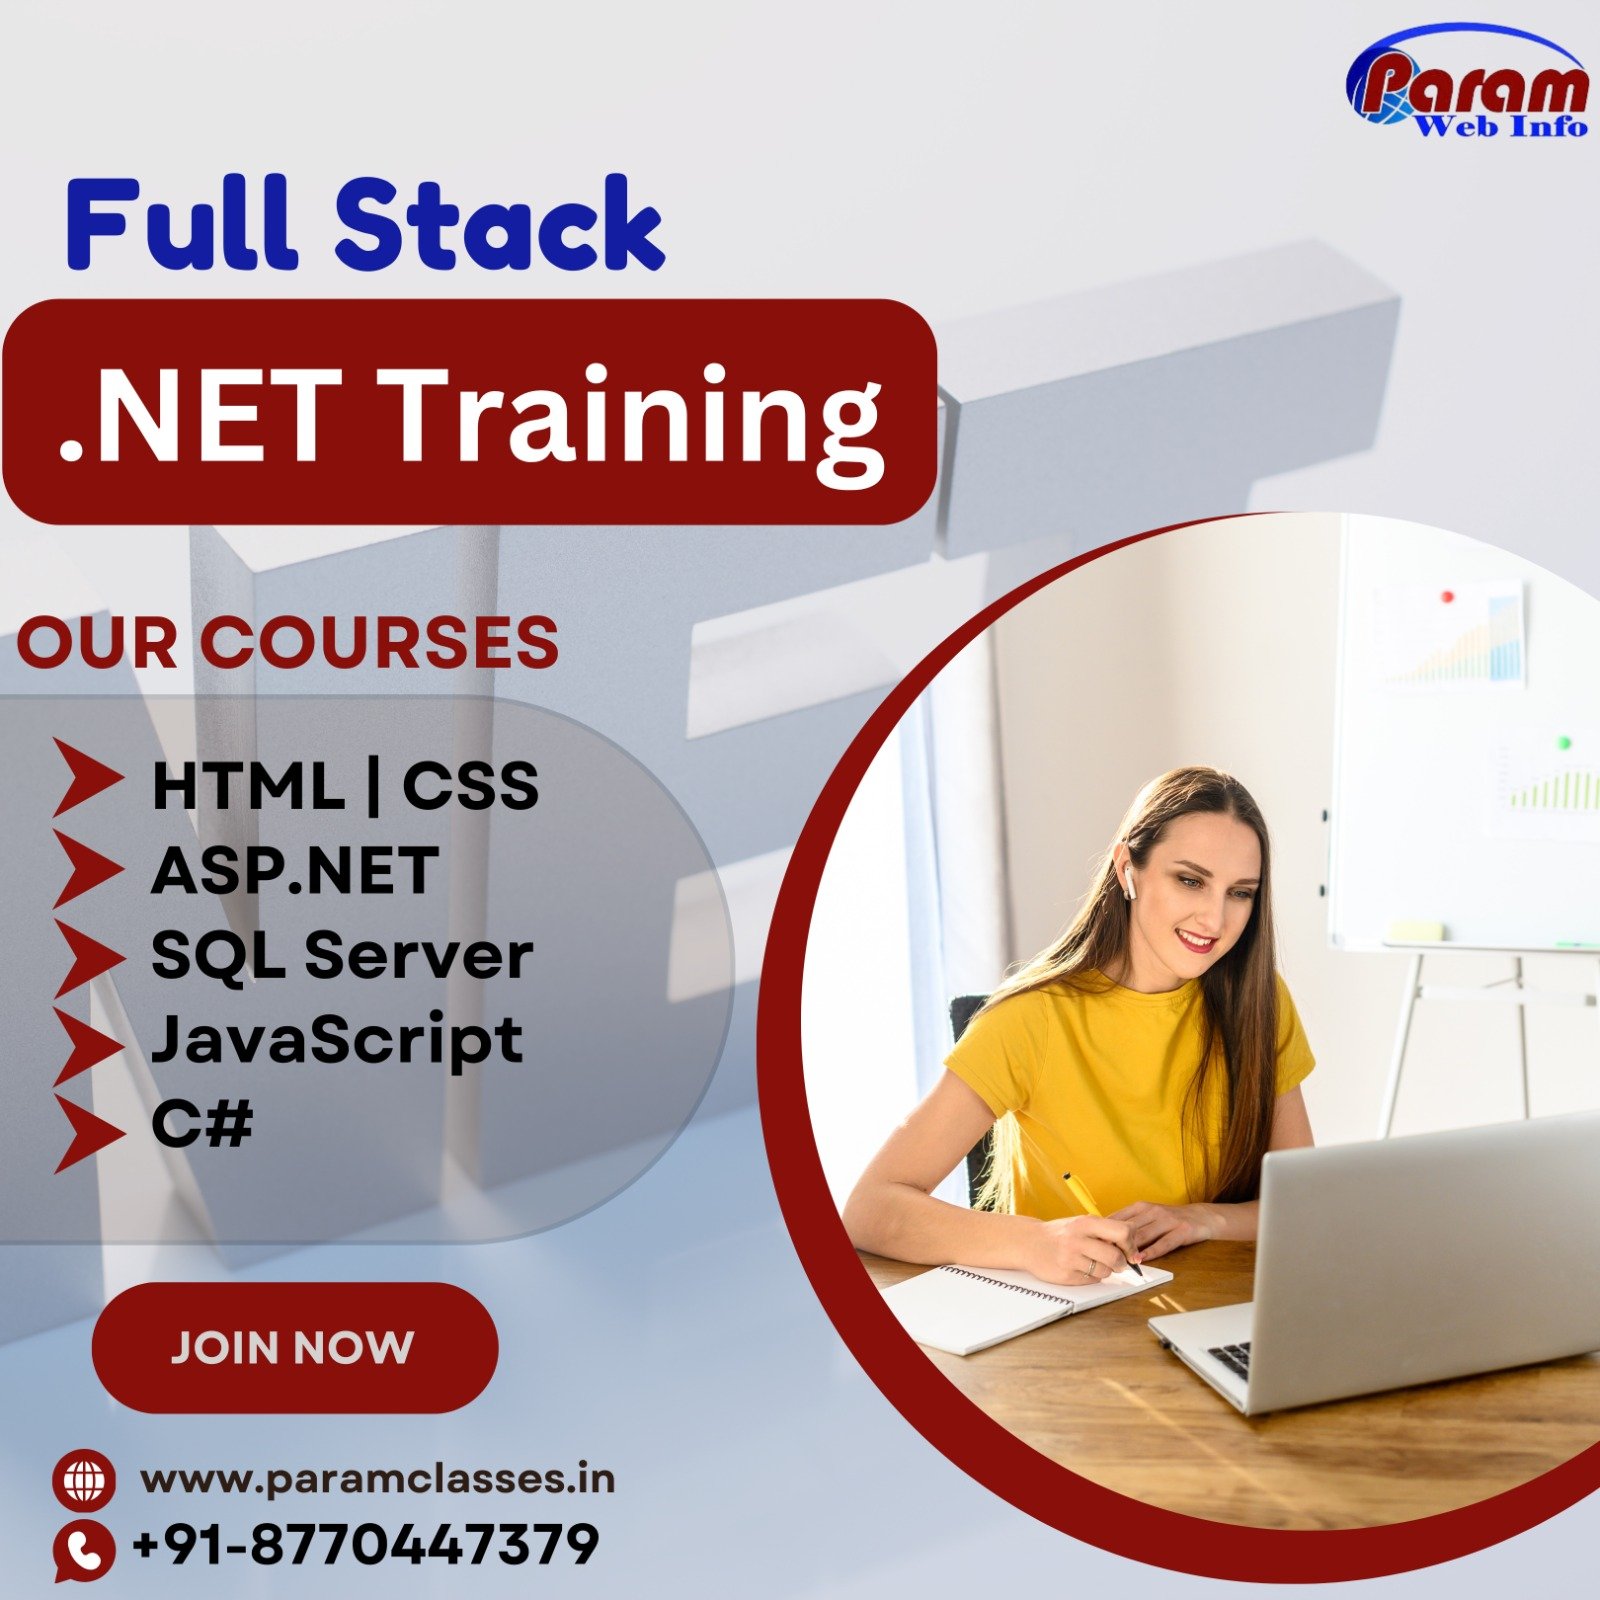 ASP.NET is a web framework features developed by Microsoft for building dynamic web applications